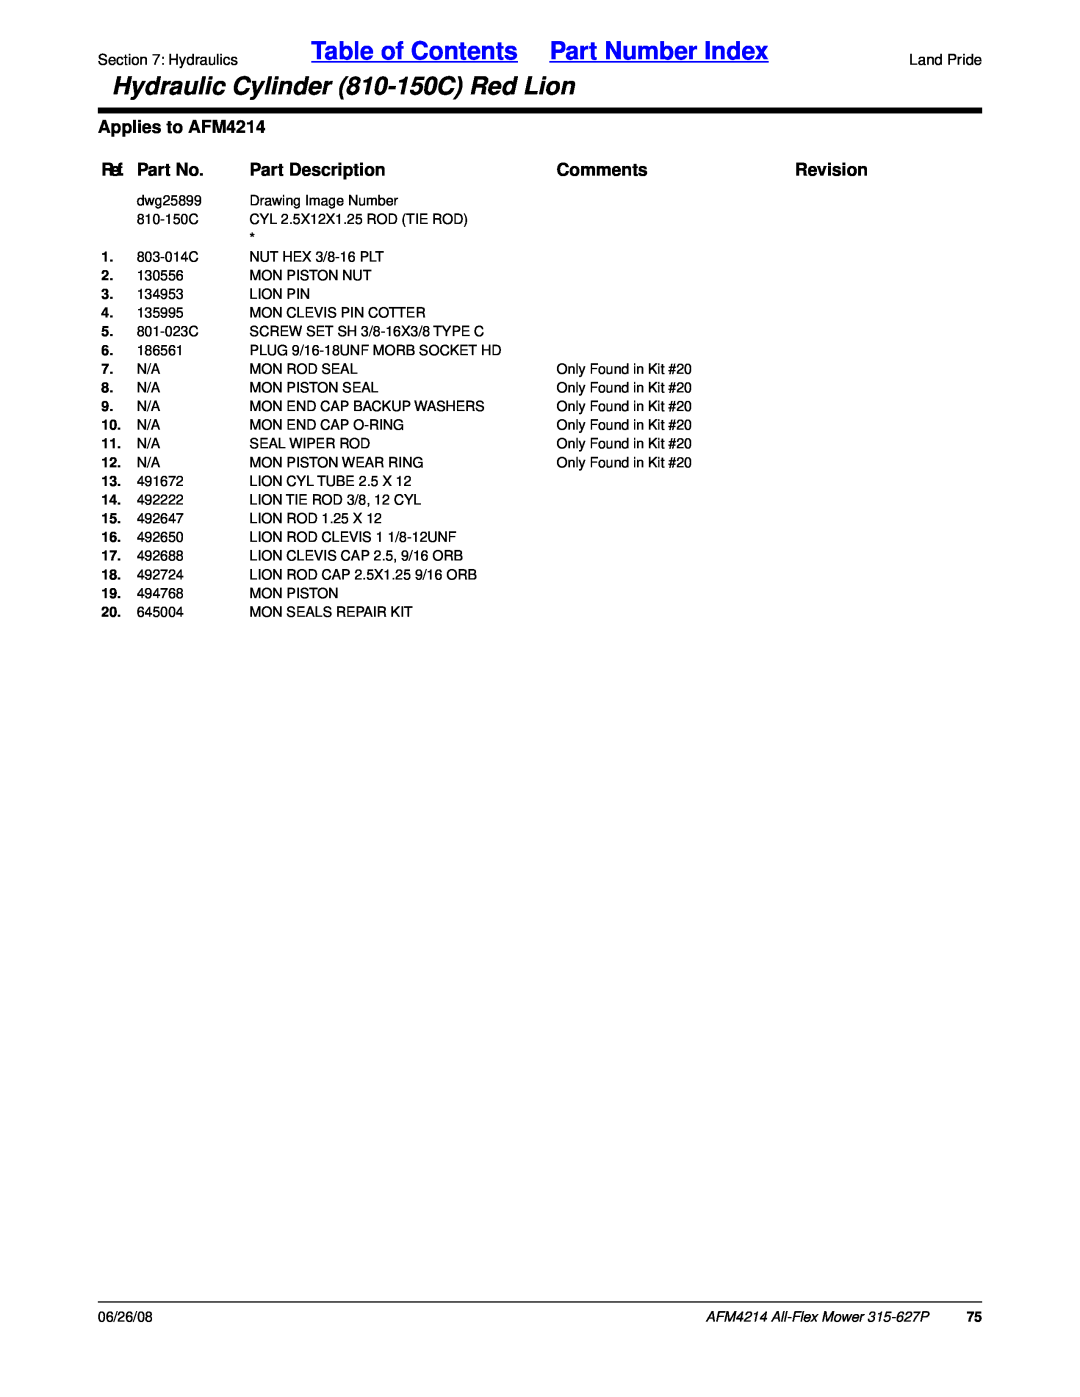 Land Pride Table of Contents Part Number Index, Hydraulic Cylinder 810-150CRed Lion, Applies to AFM4214, Ref. Part No 